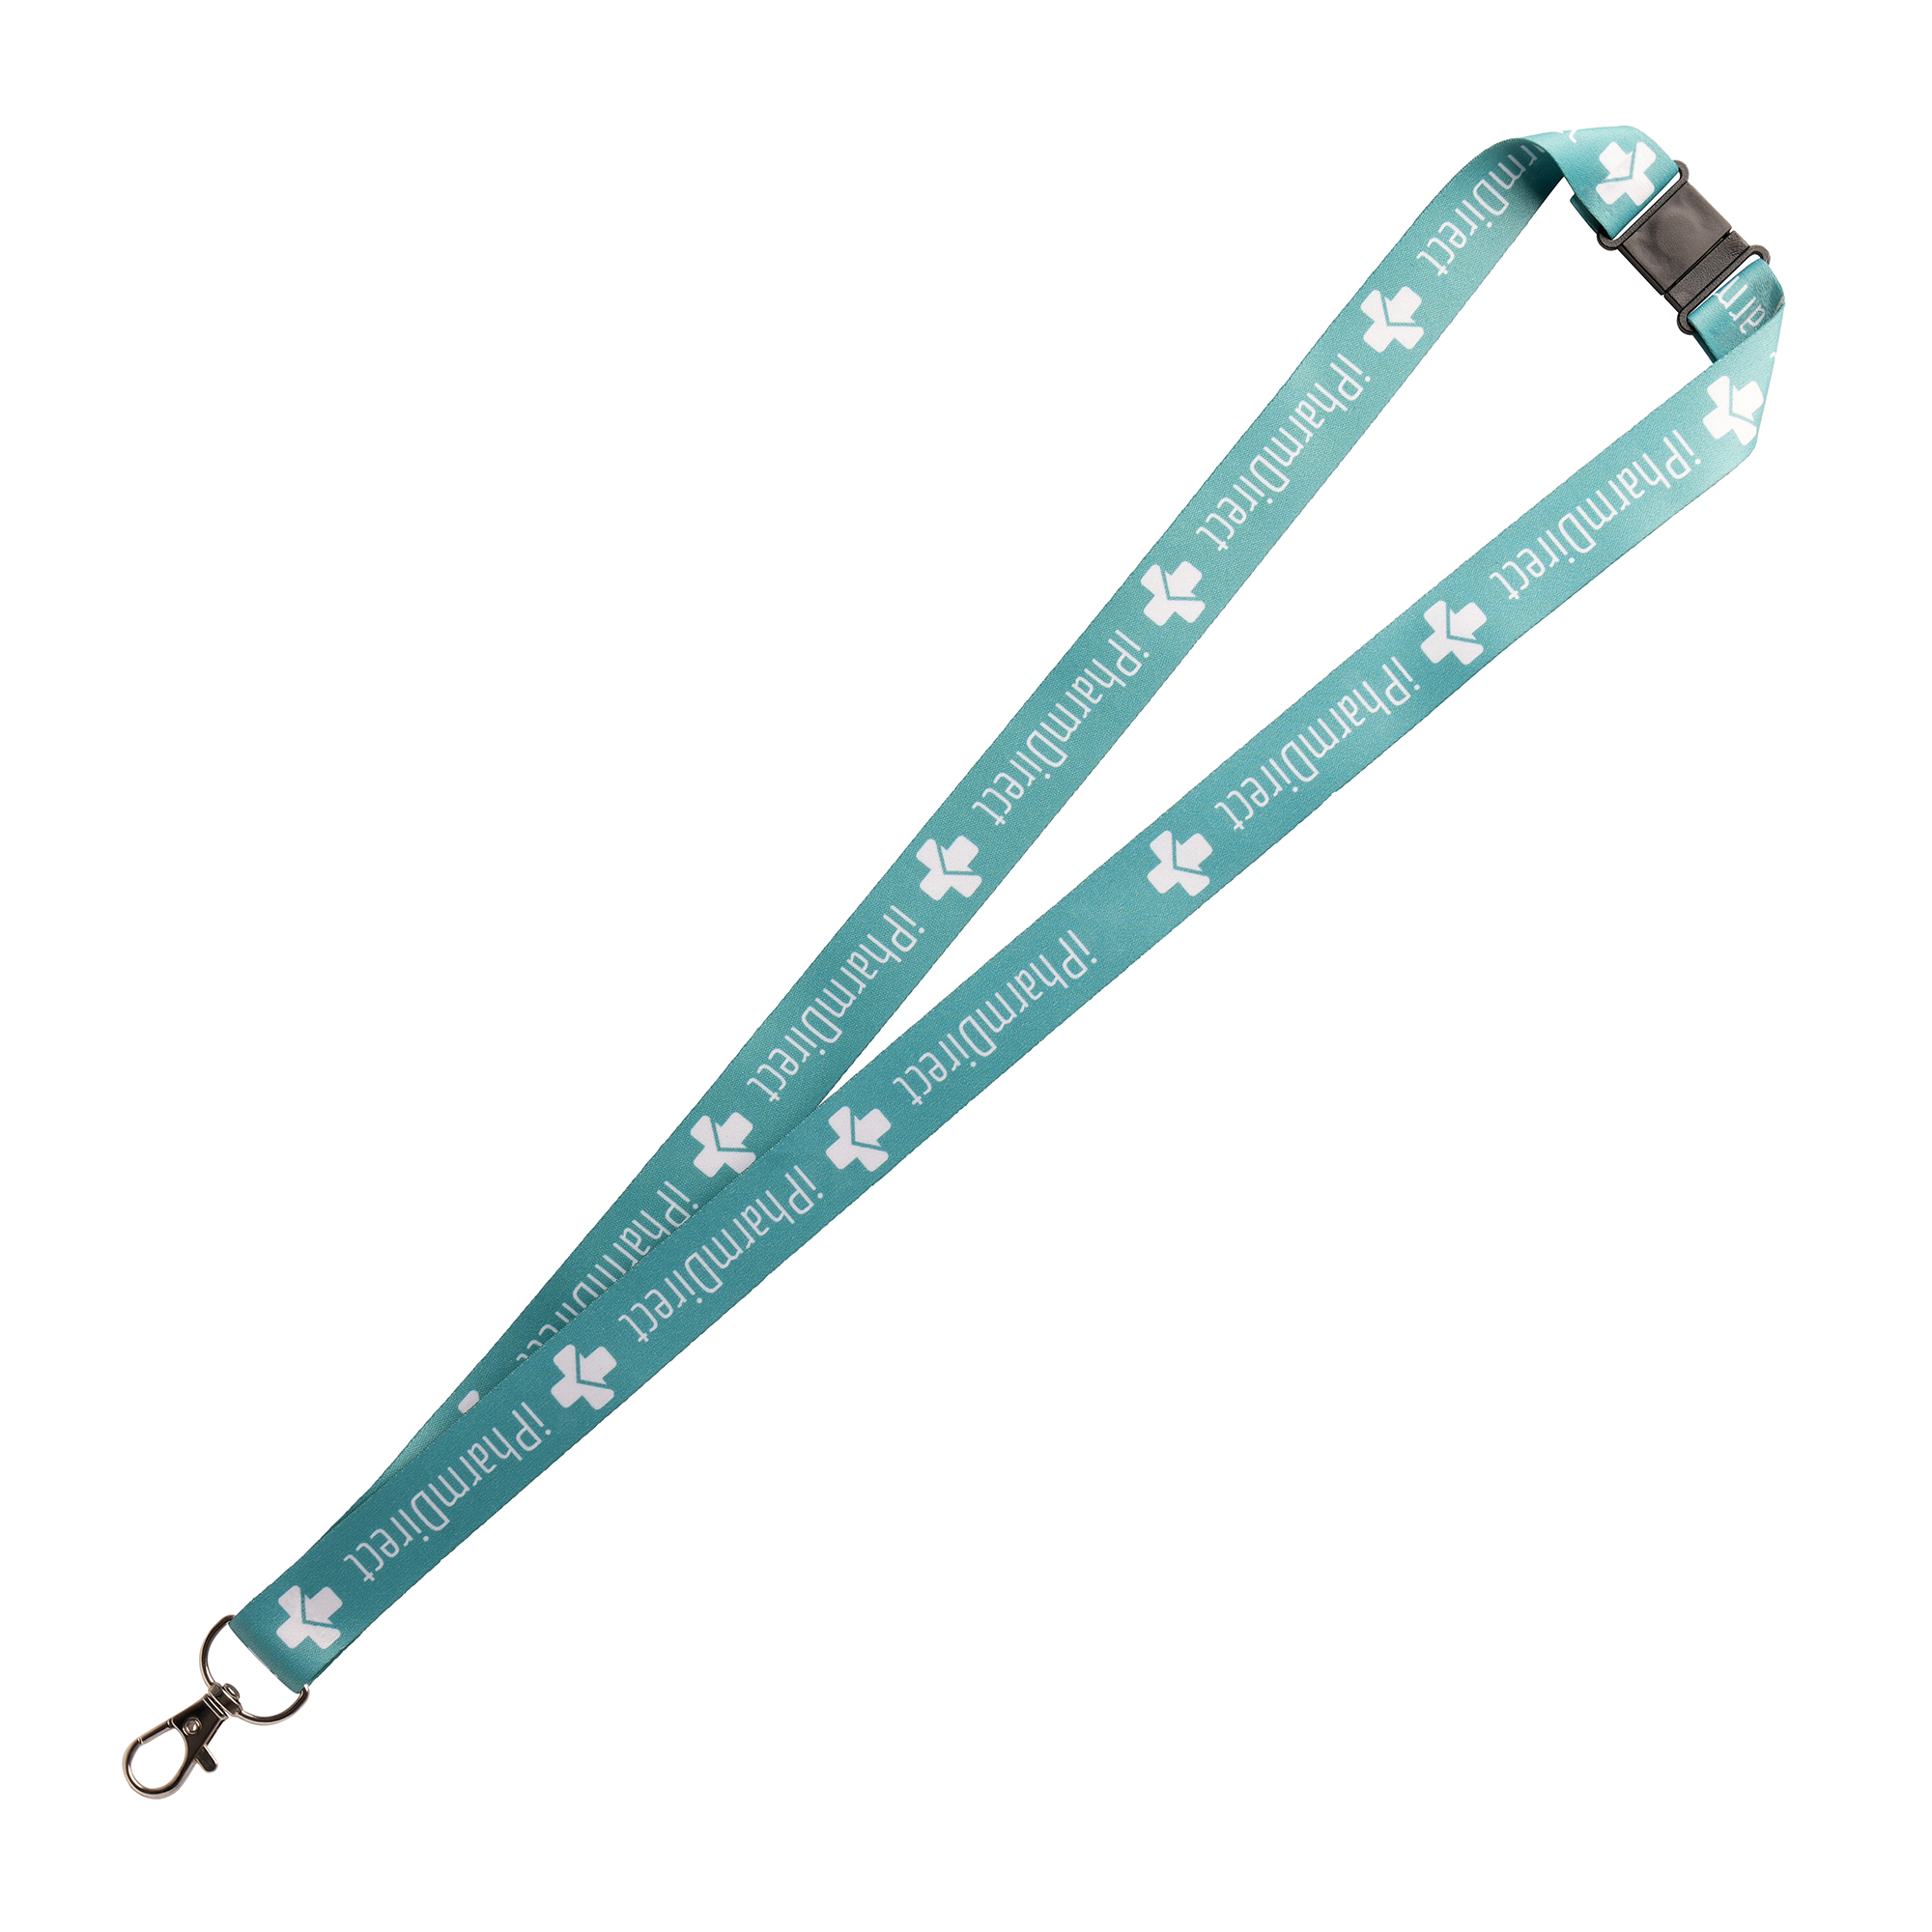 White RPET lanyard with full colour dye sublimation design to one or both sides. Price includes trigger clip, safety break and dye sublimation both sides (same design).